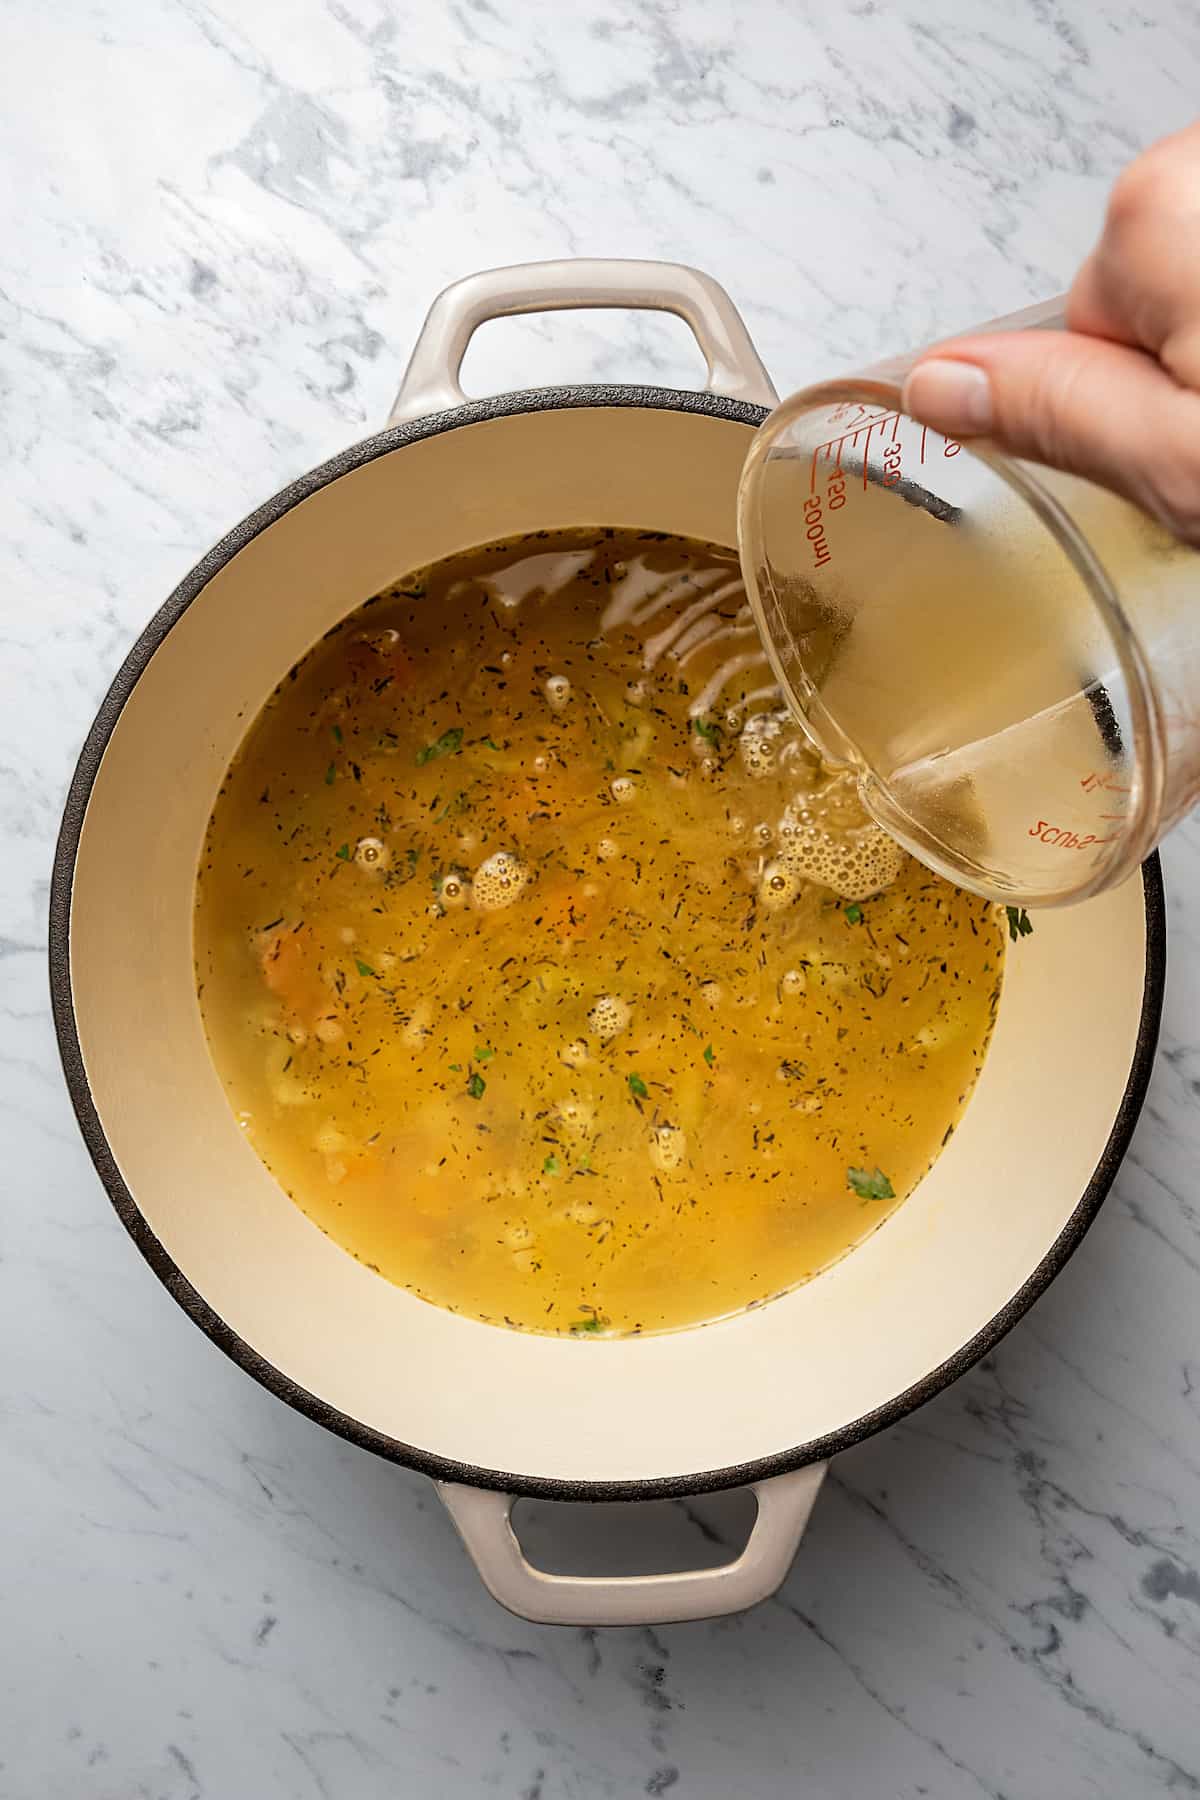 Pouring chicken broth into a pot.